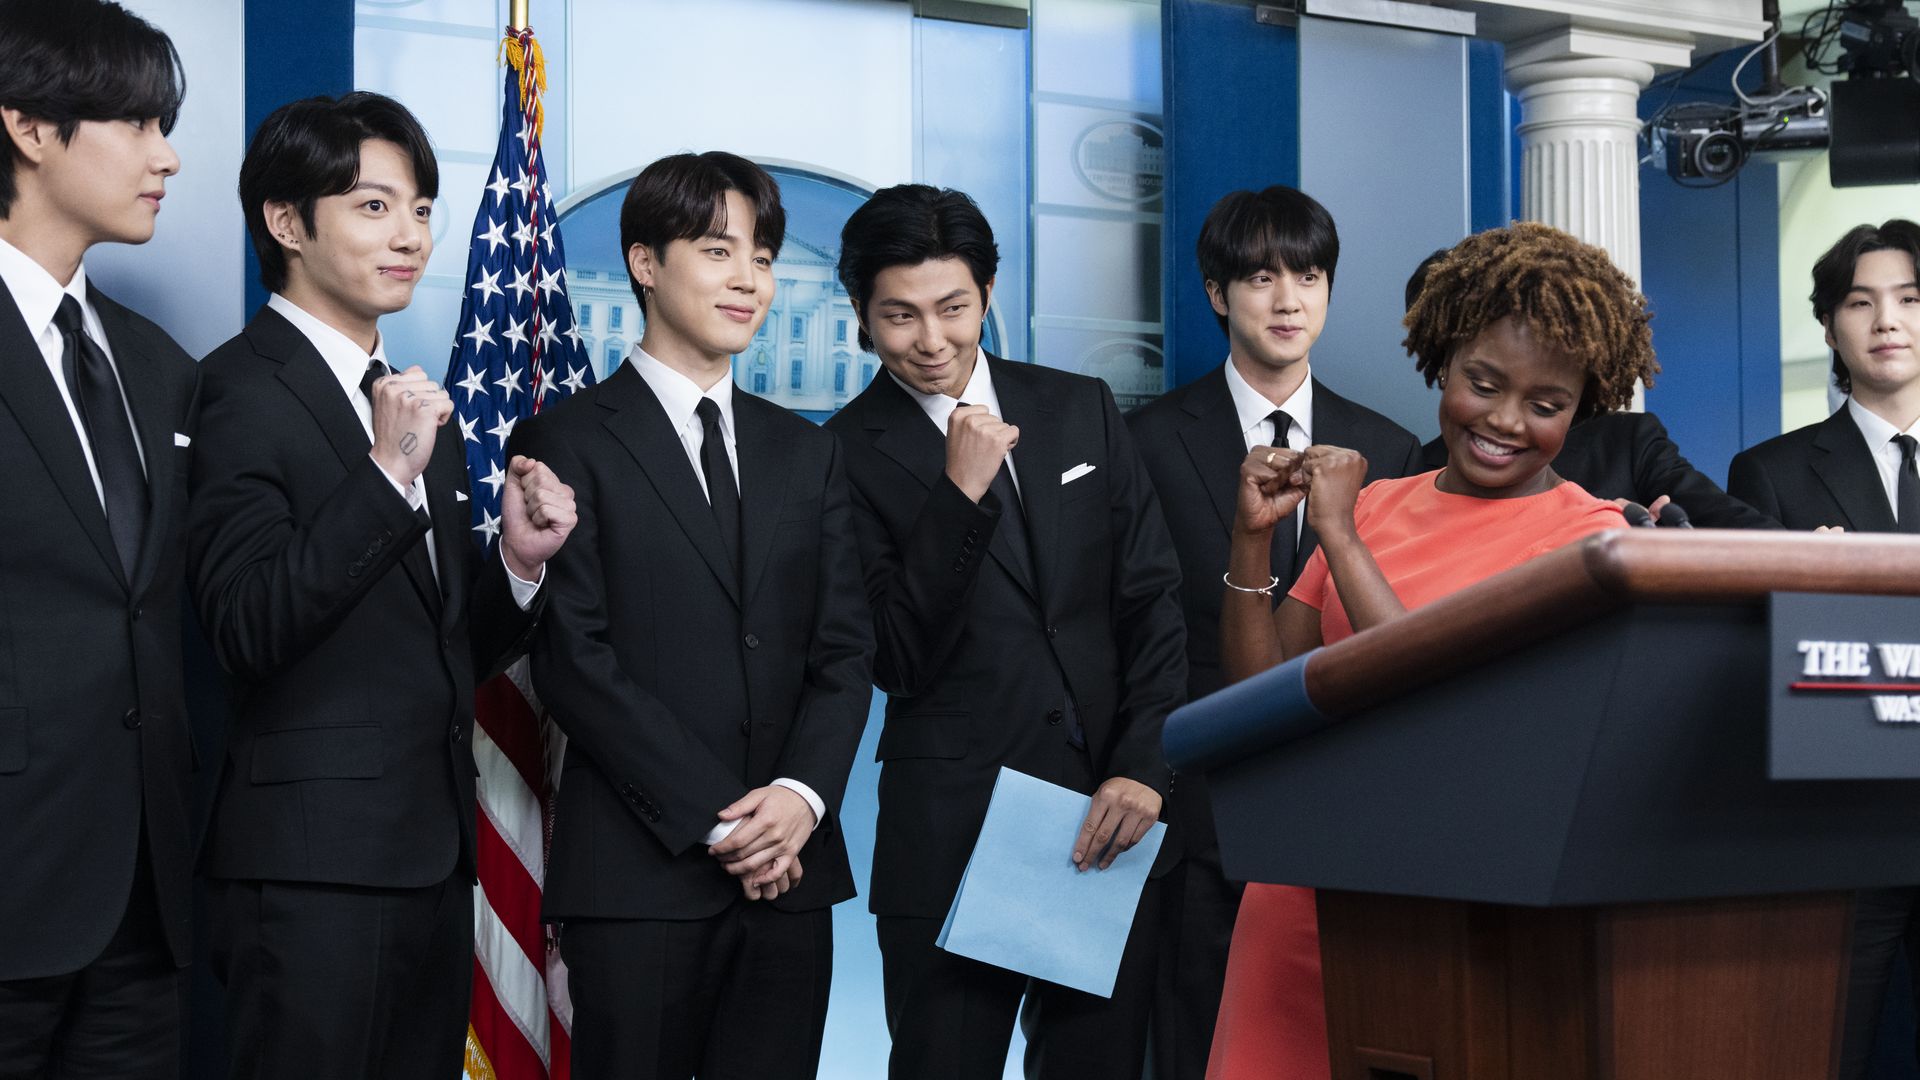 BTS, the K-pop band from South Korea, and Karine Jean-Pierre, White House press secretary, address the media before the group met with President Joe Biden at the White House 